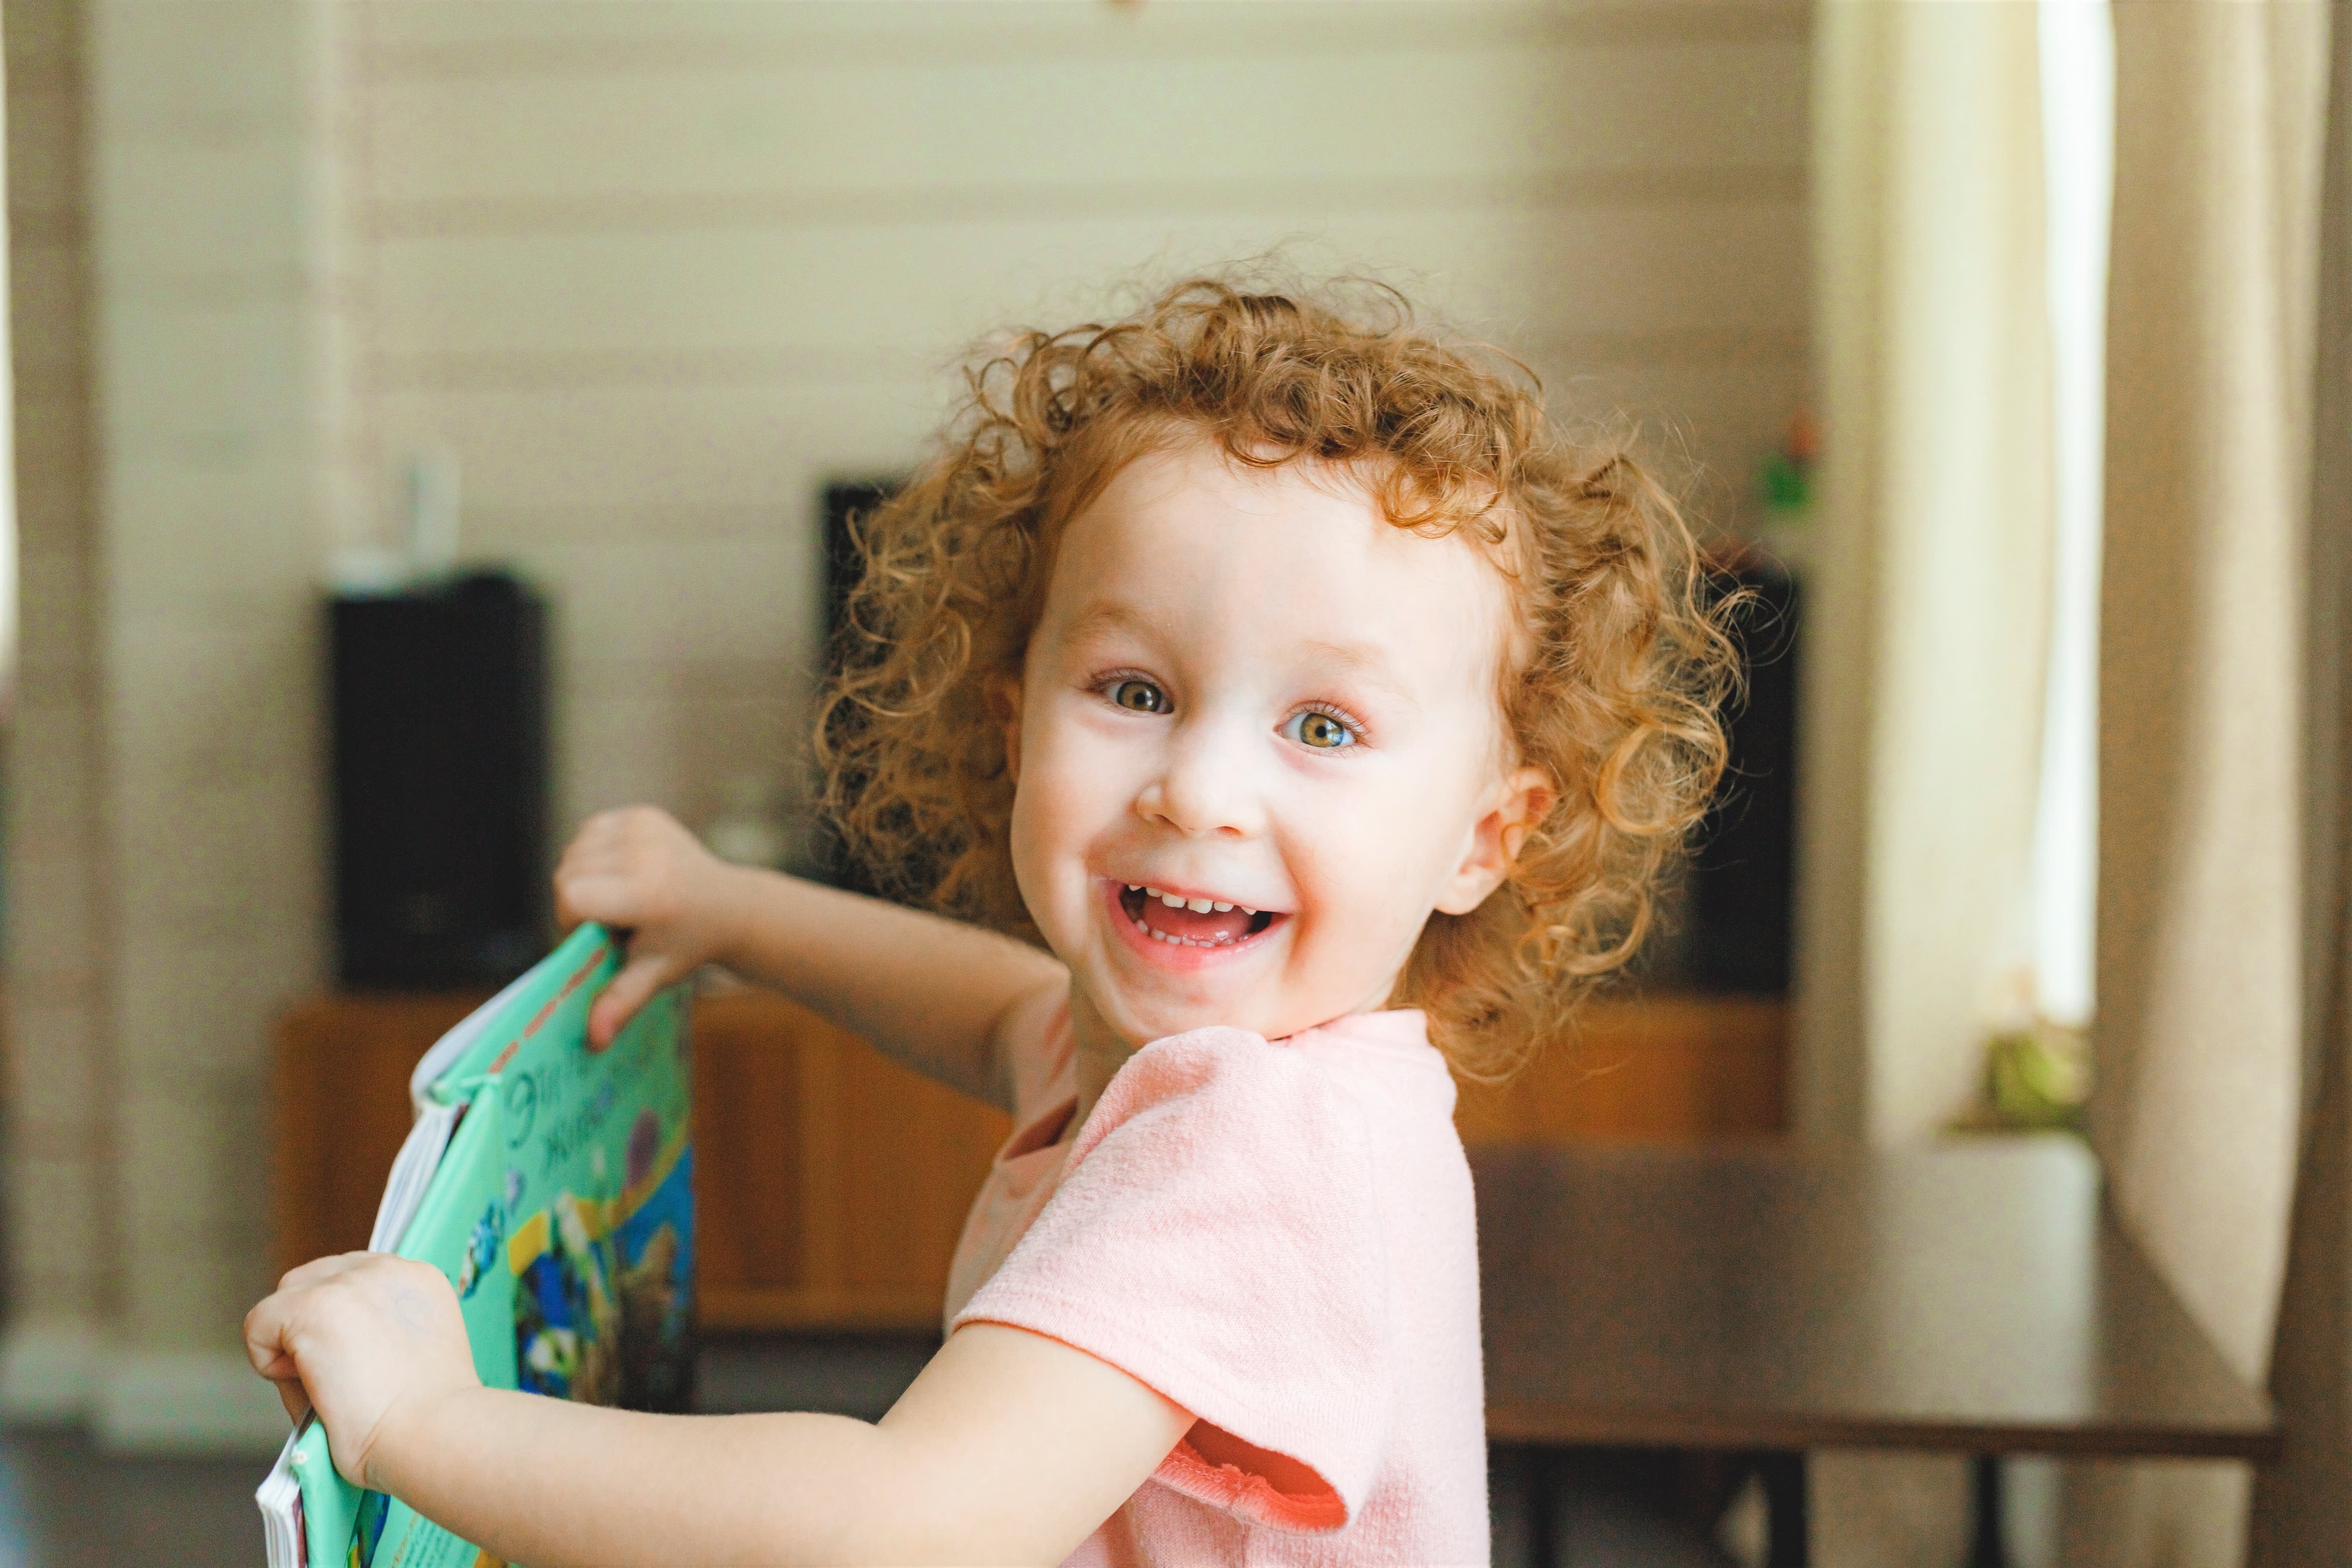 How do I know if my 3 year old is gifted and talented?